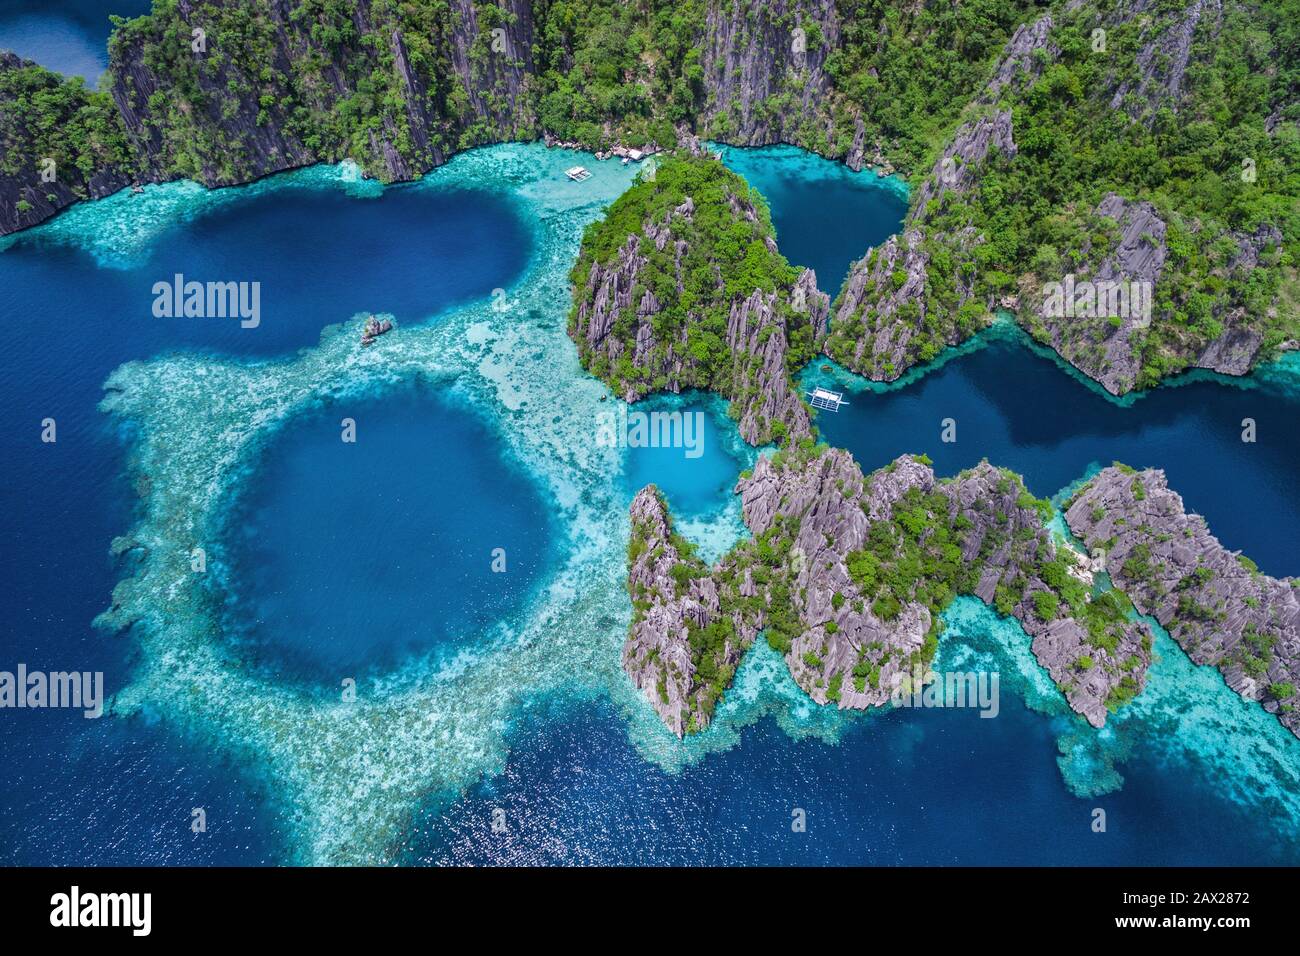 Coron Island, Palawan, Philippines, aerial view of beautiful lagoons and limestone cliffs. Stock Photo